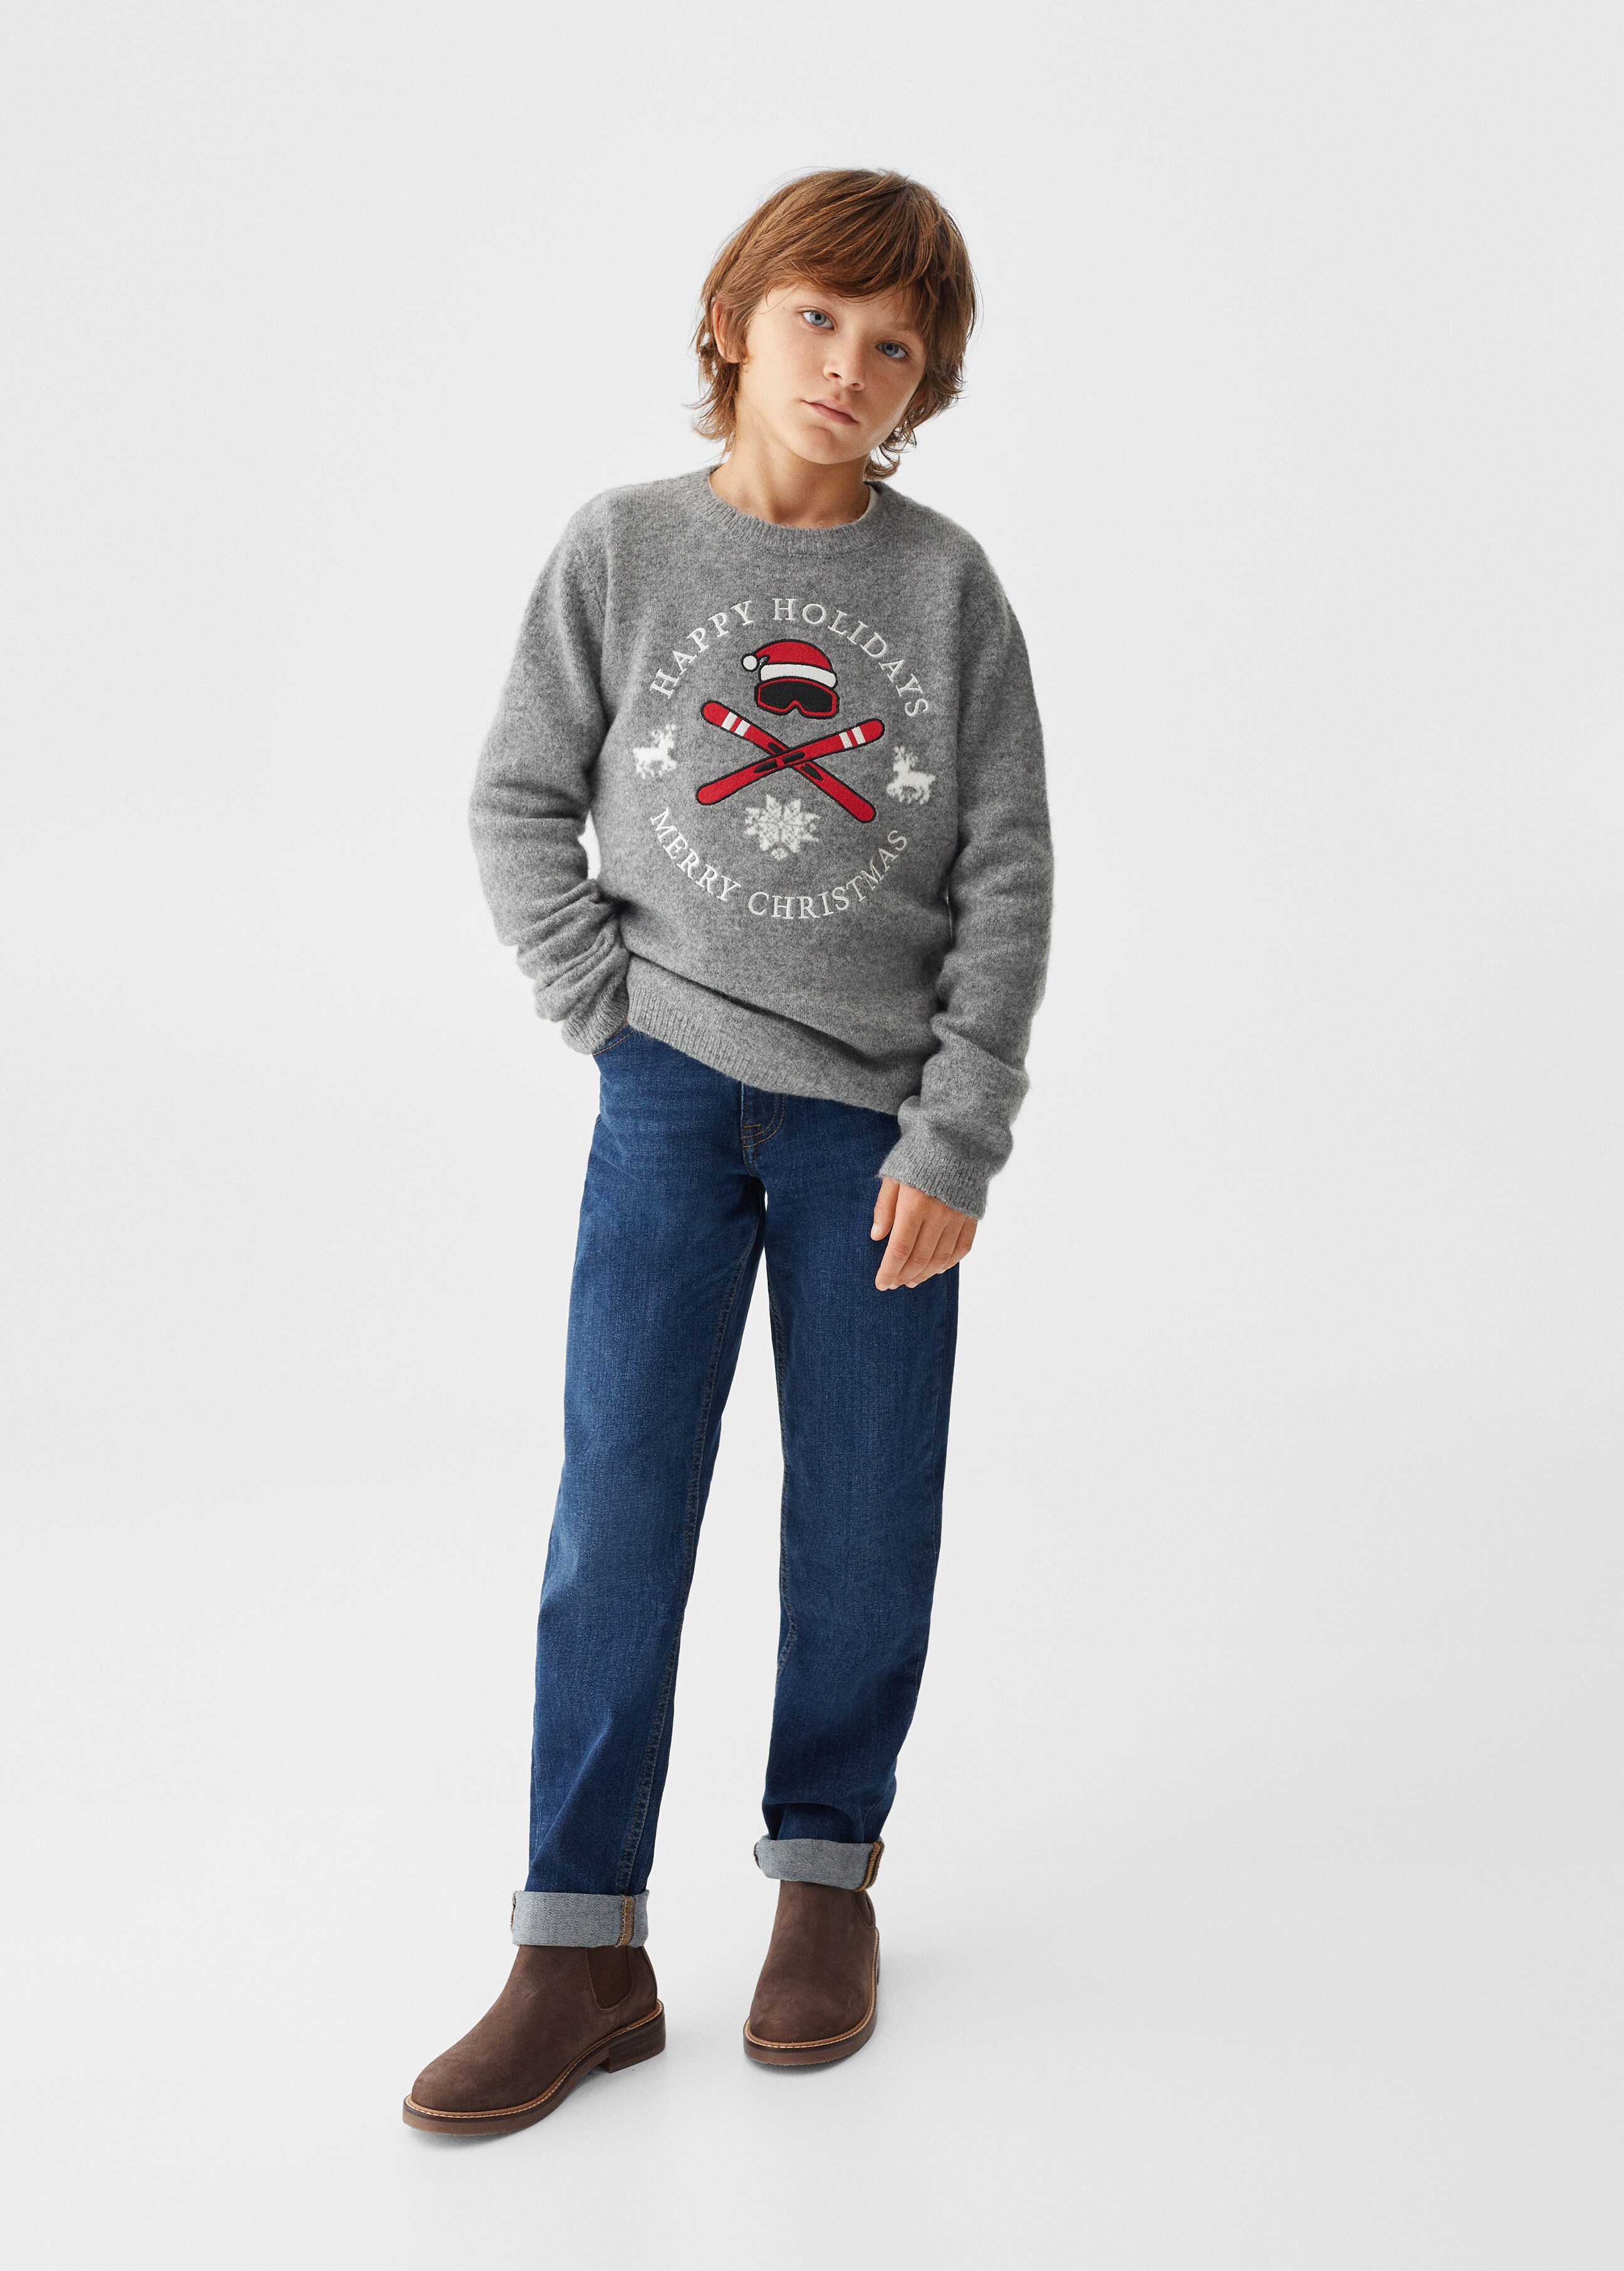 Knit embroidered sweater - General plane